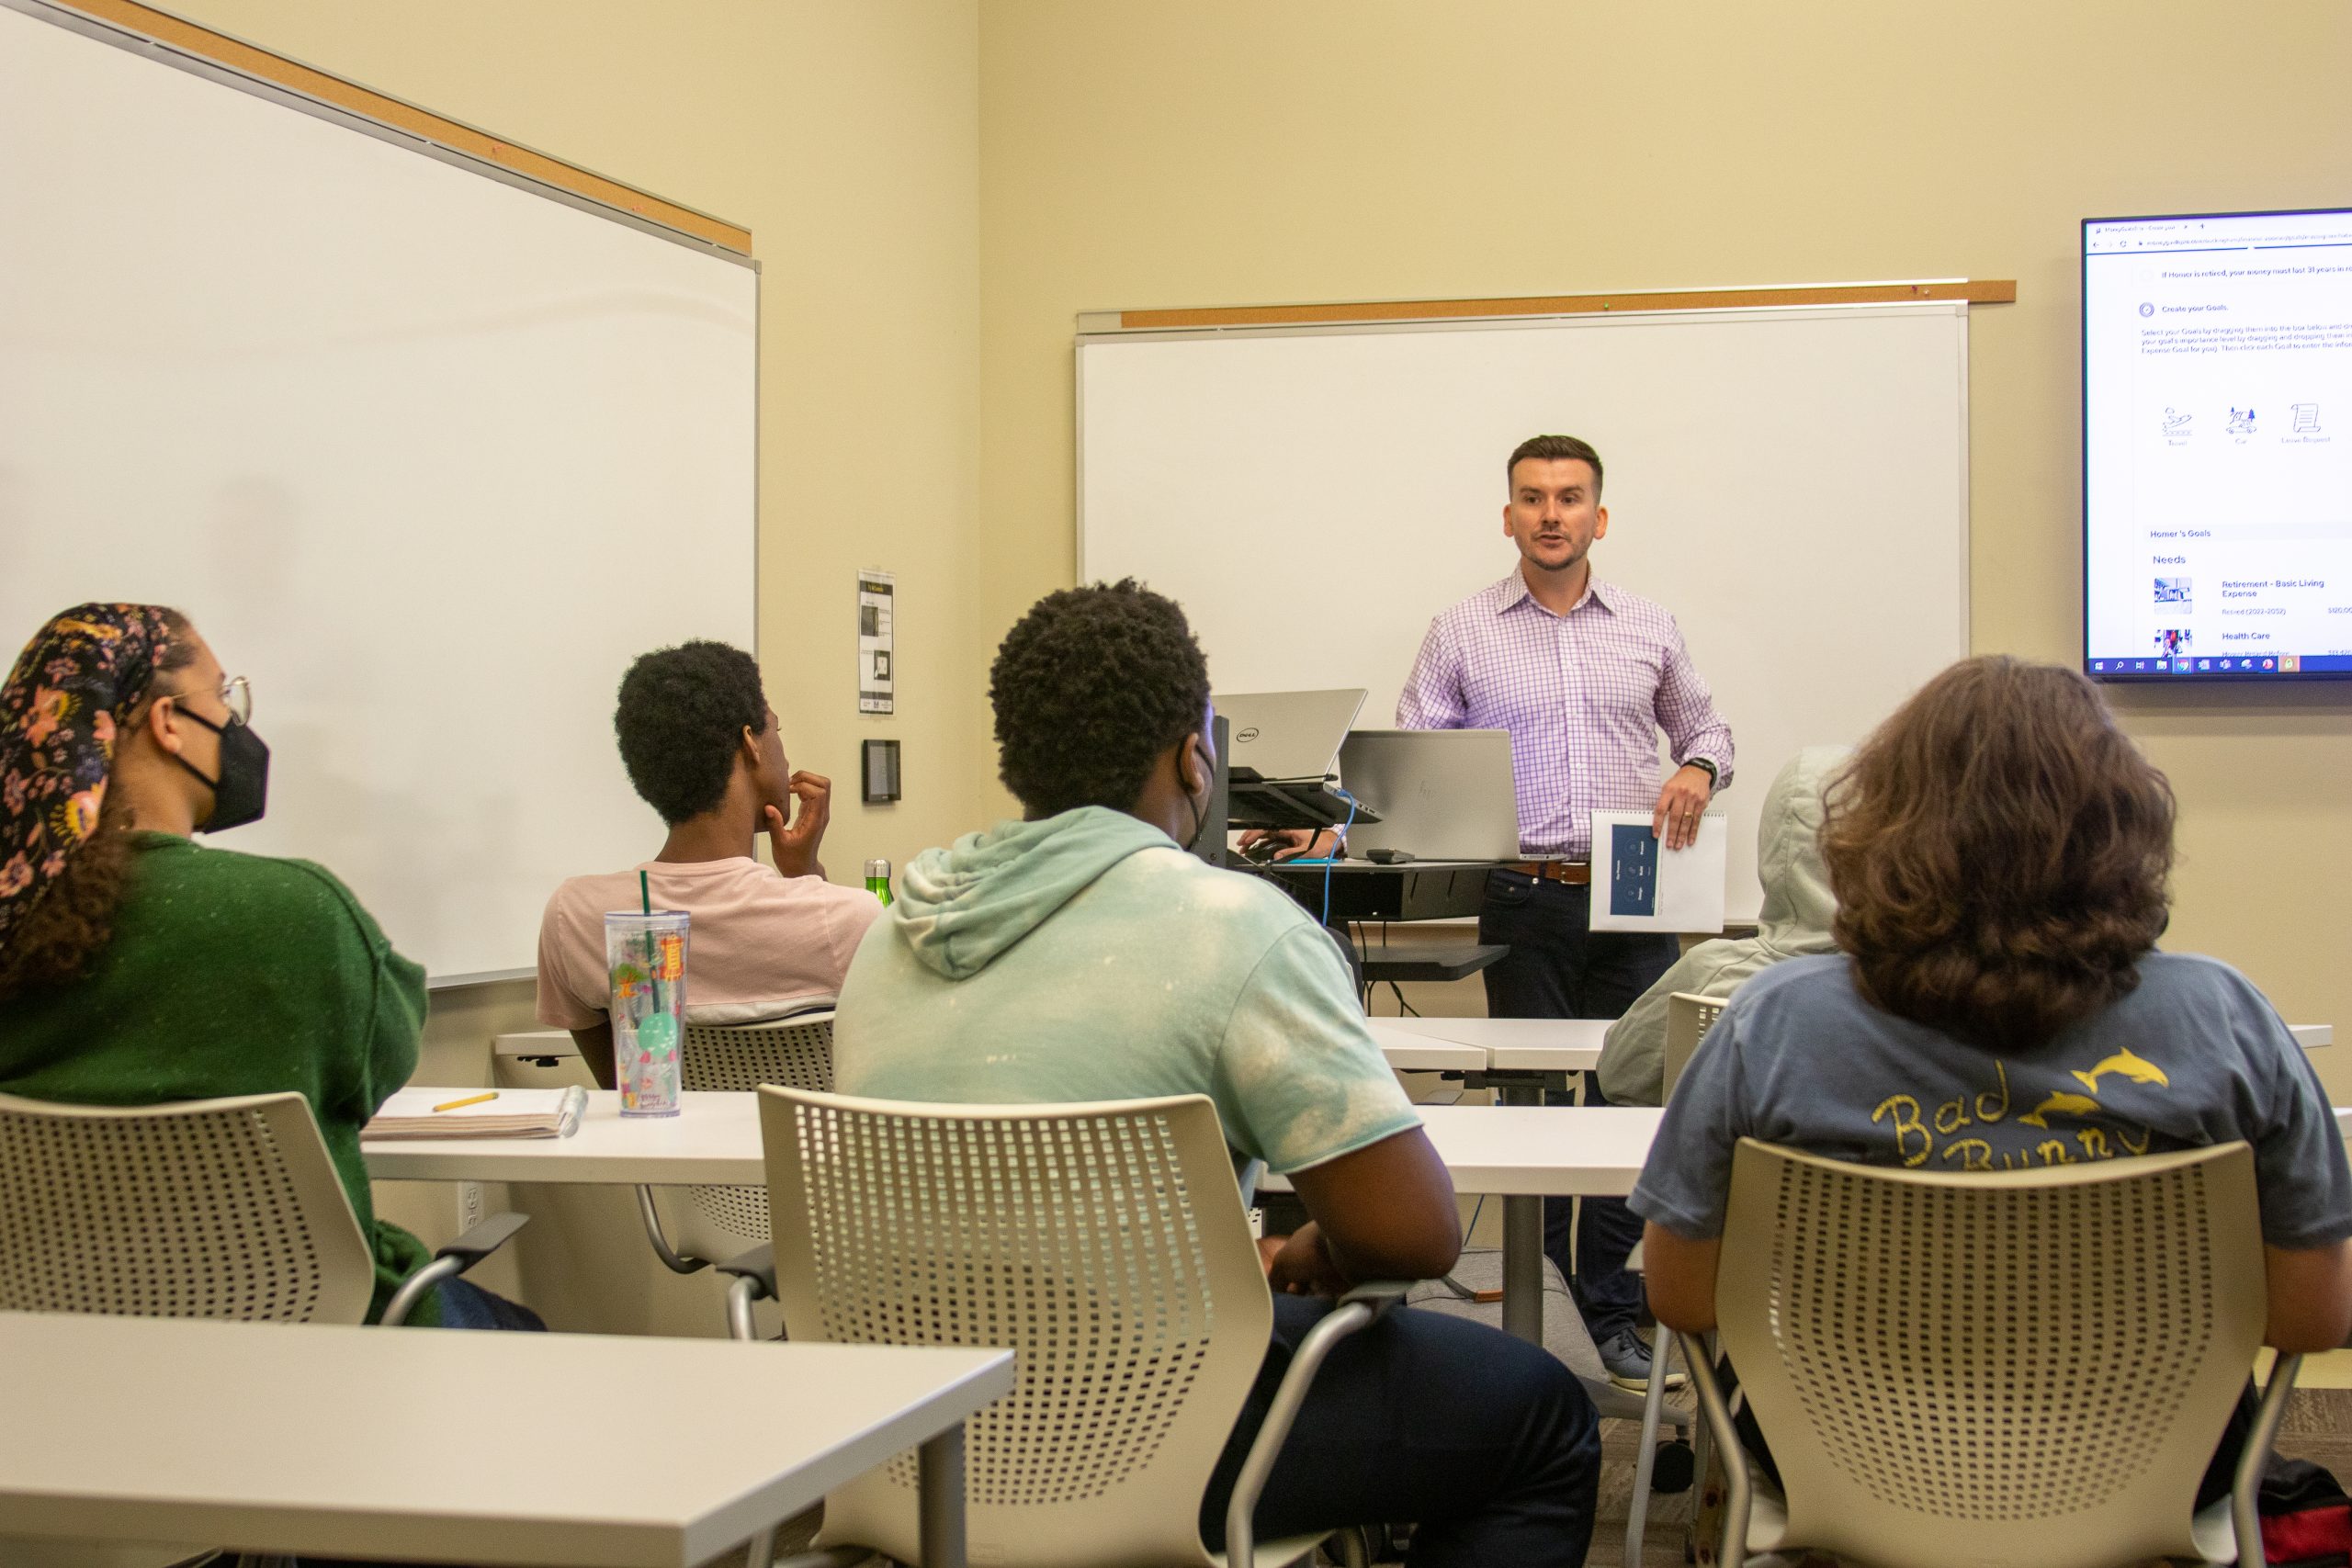 LGBTQ+ wealth advisor talks to students about empathy and inclusion in finance